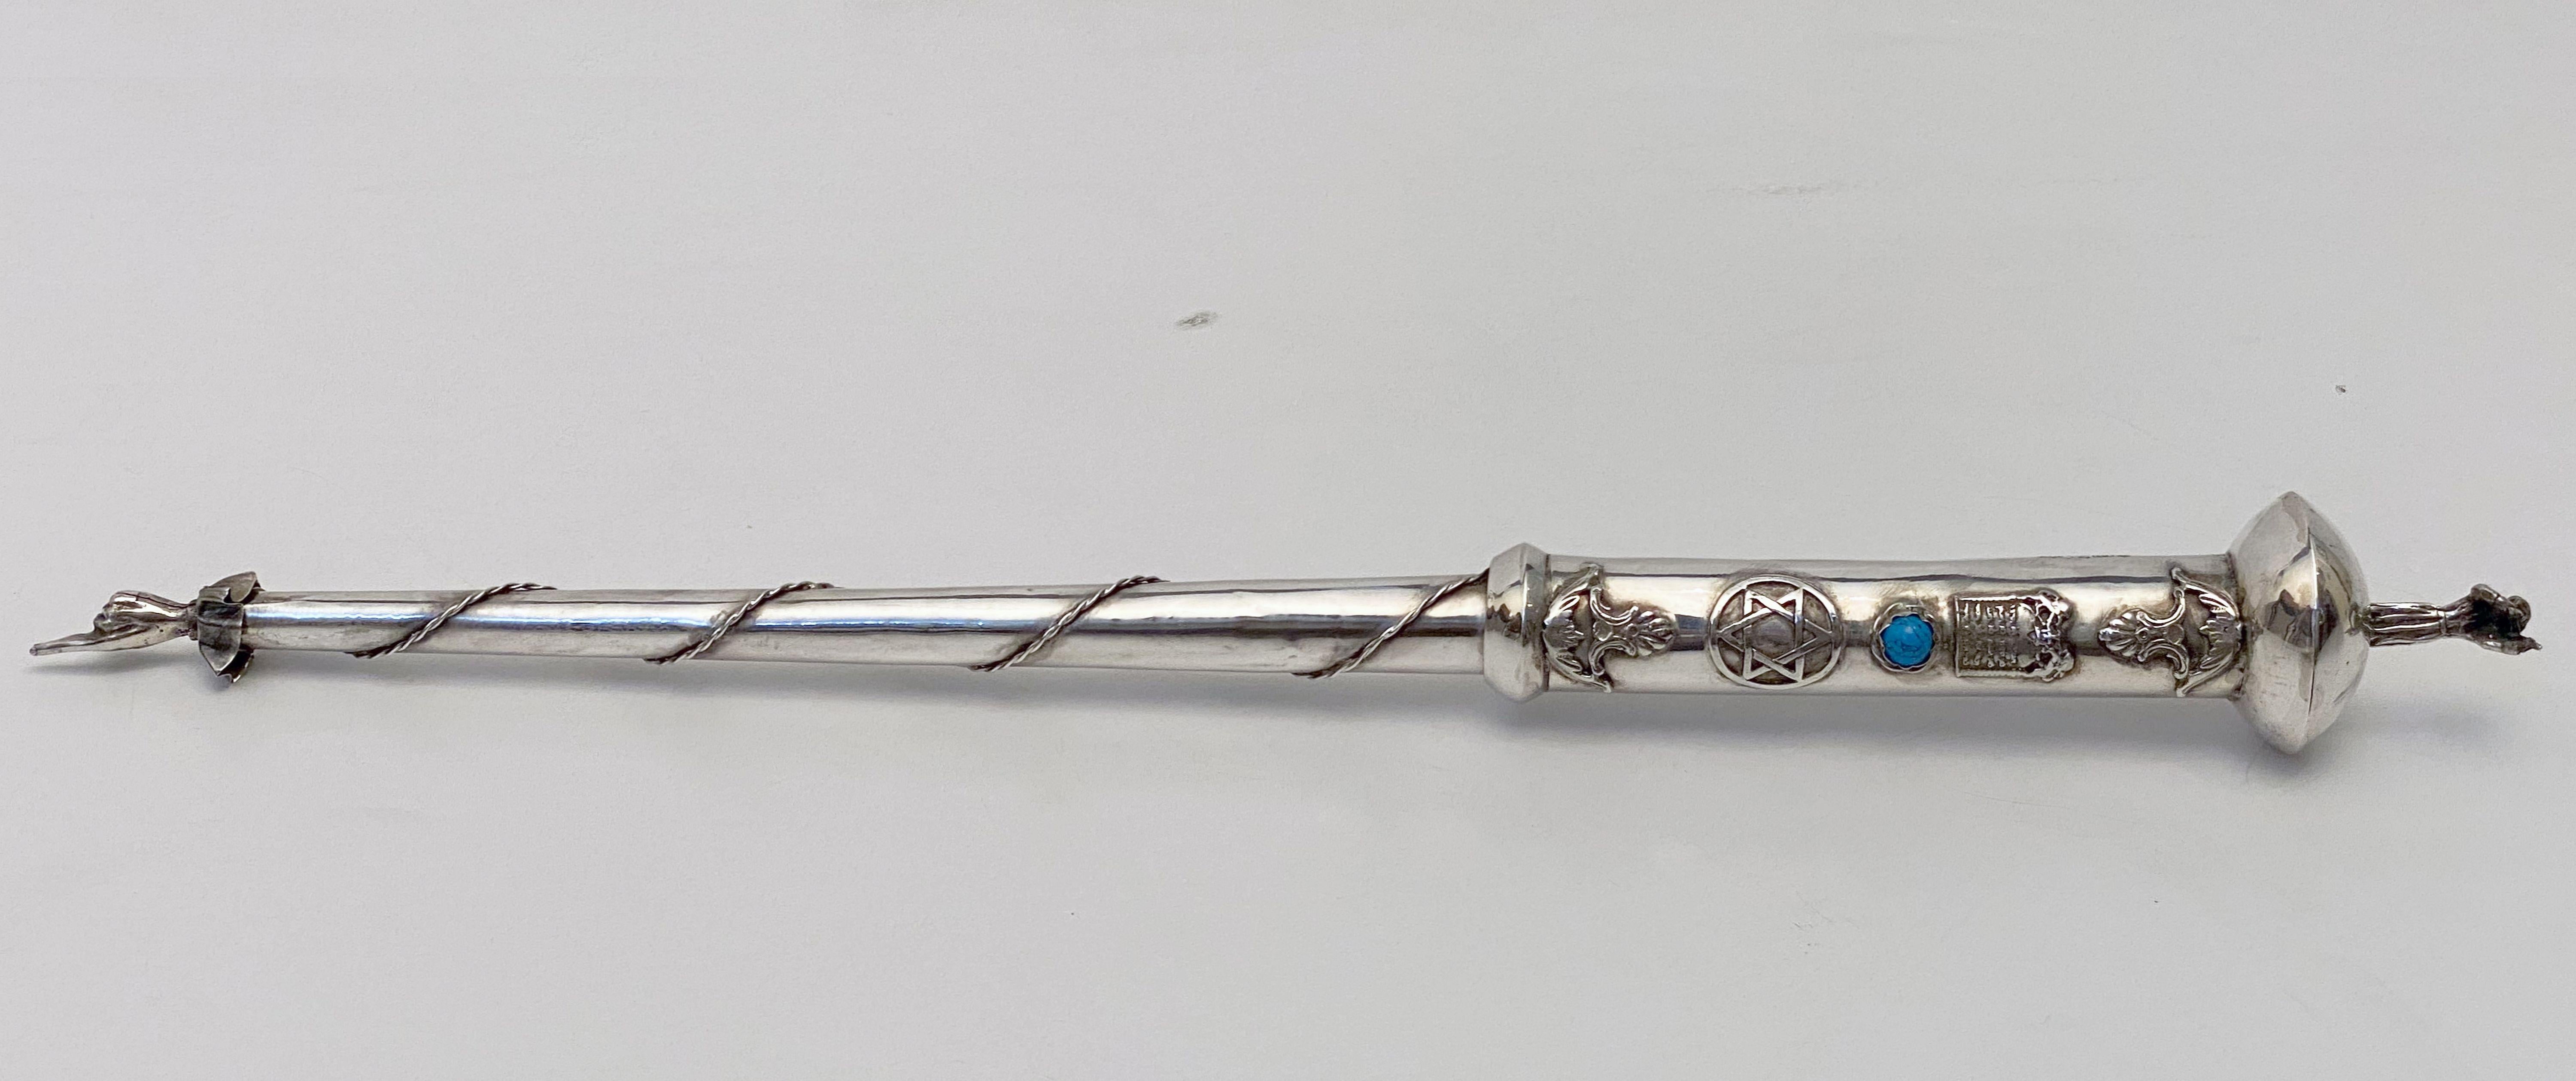 A fine Jewish yad or torah pointer of silver featuring a robed man playing a violin or fiddle on the handle end, with a traditional pointed finger hand on the other end. With decorative blue stone and Star of David. A handsome find for the Judaica